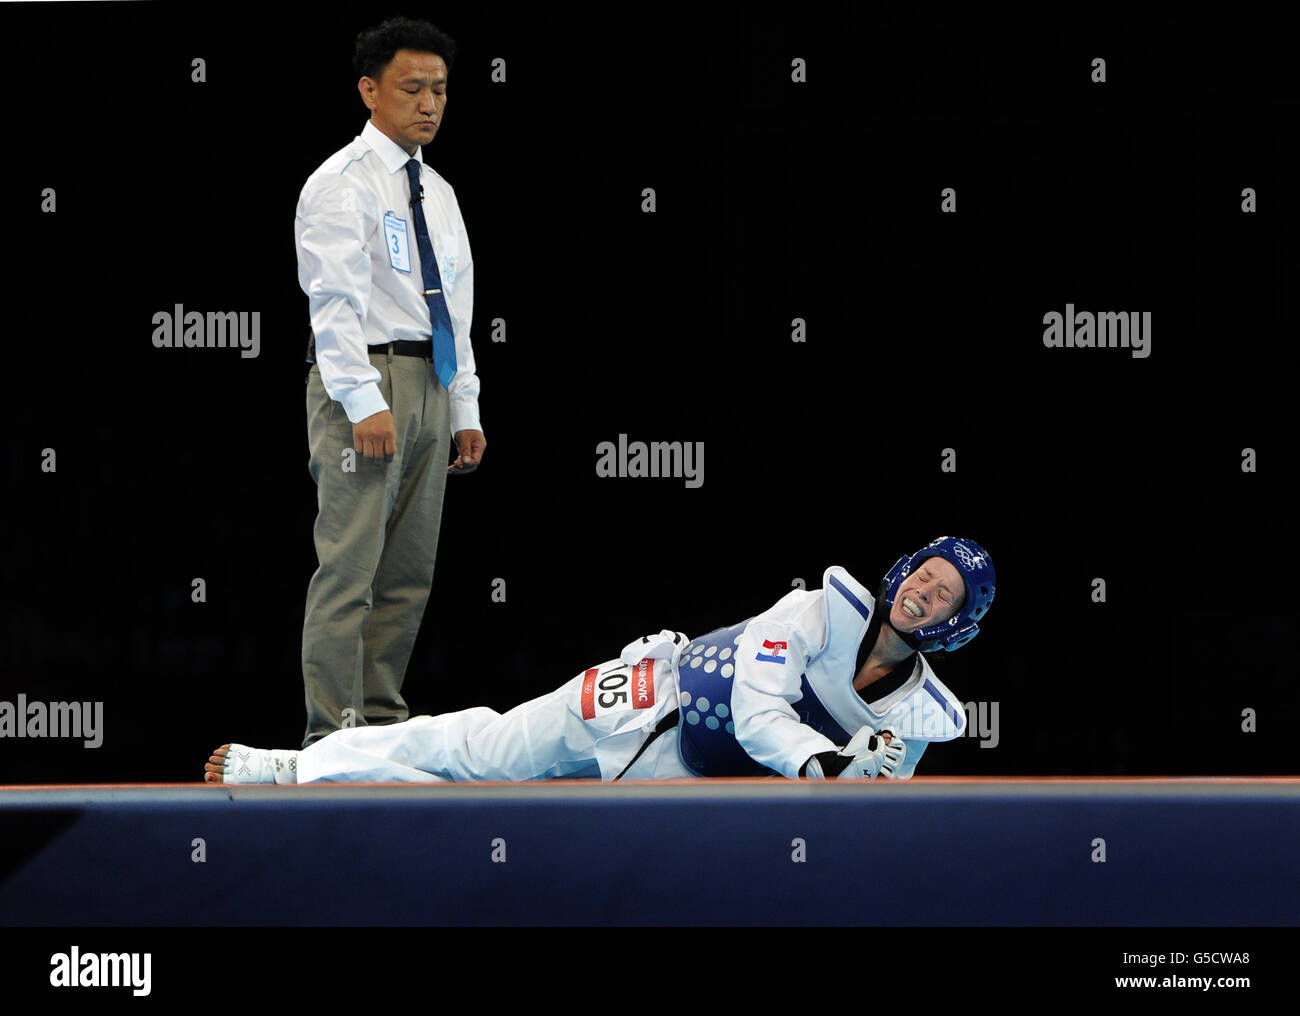 Croatia's Lucija Zaninovic reacts after being knocked down as she competes against Central African republic's Seulki Kang during the Women's (-49kg) Taekwondo at the ExCel centre, London Stock Photo